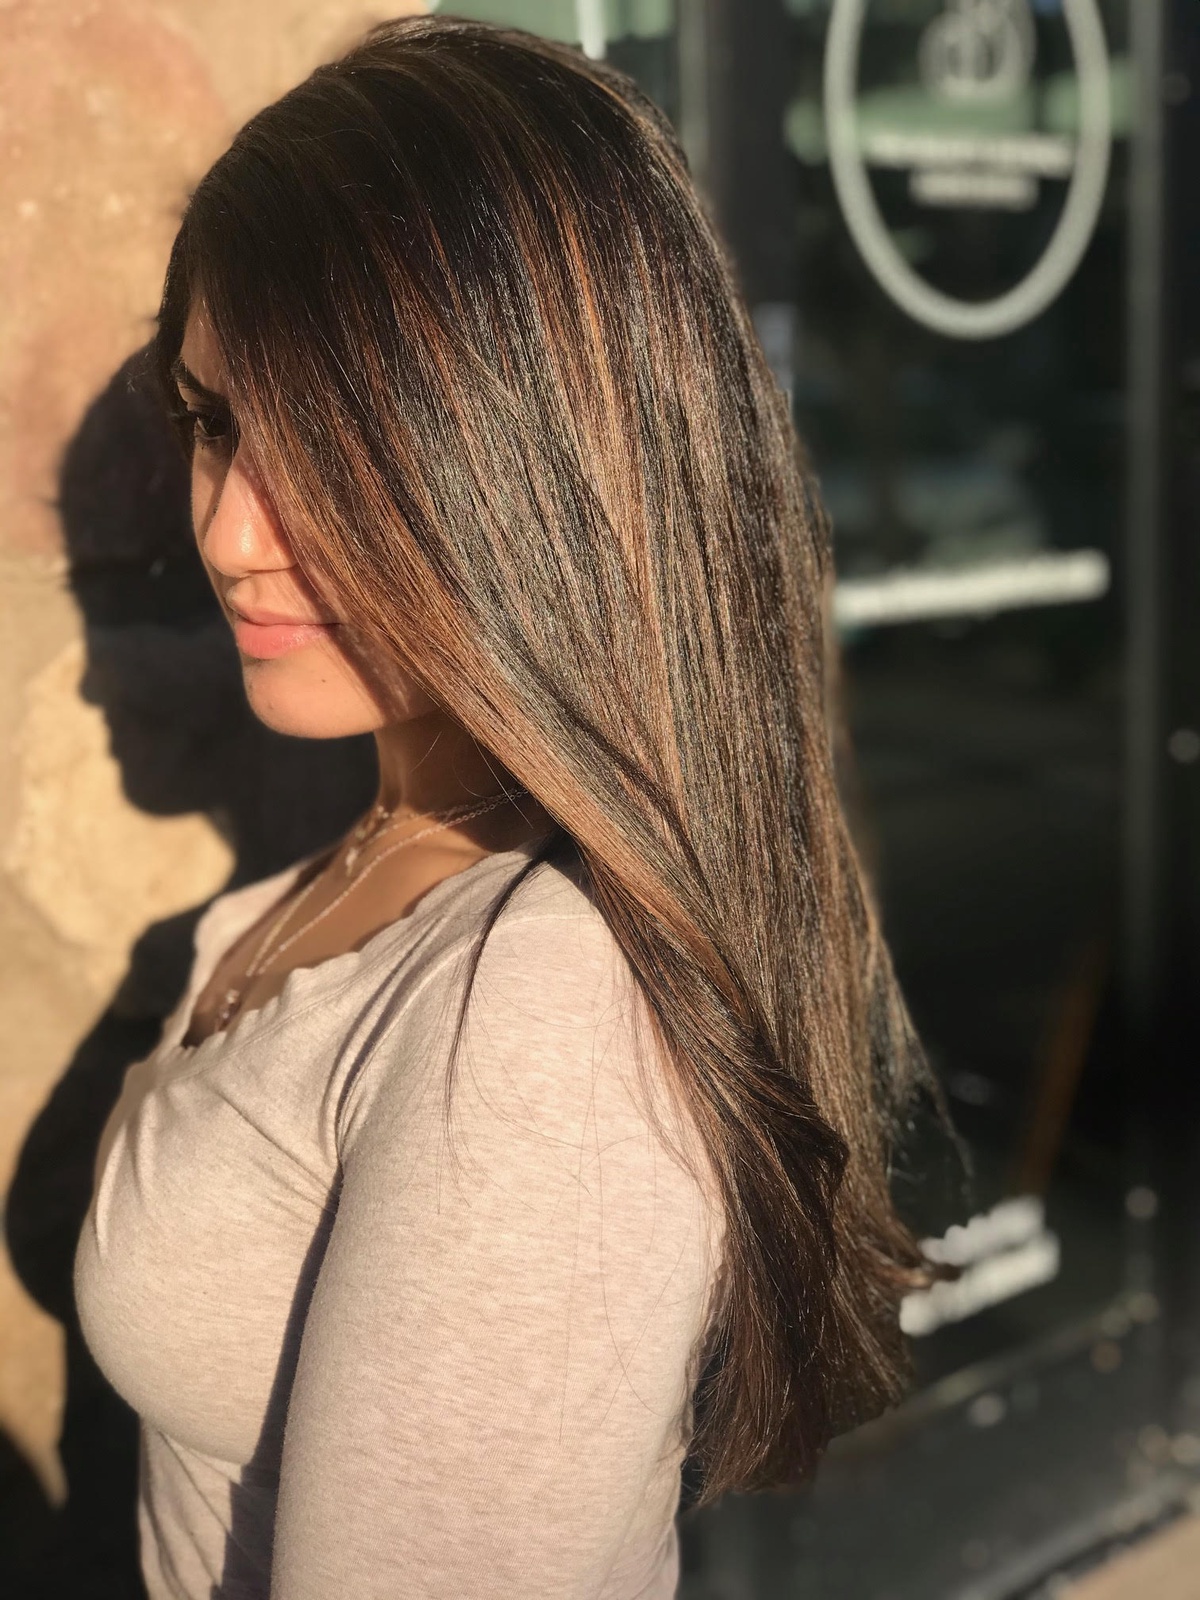 Discover Affordable Luxury at Bellissima Hair Salon: The Best Choice for Hair Salons in Scottsdale, AZ!